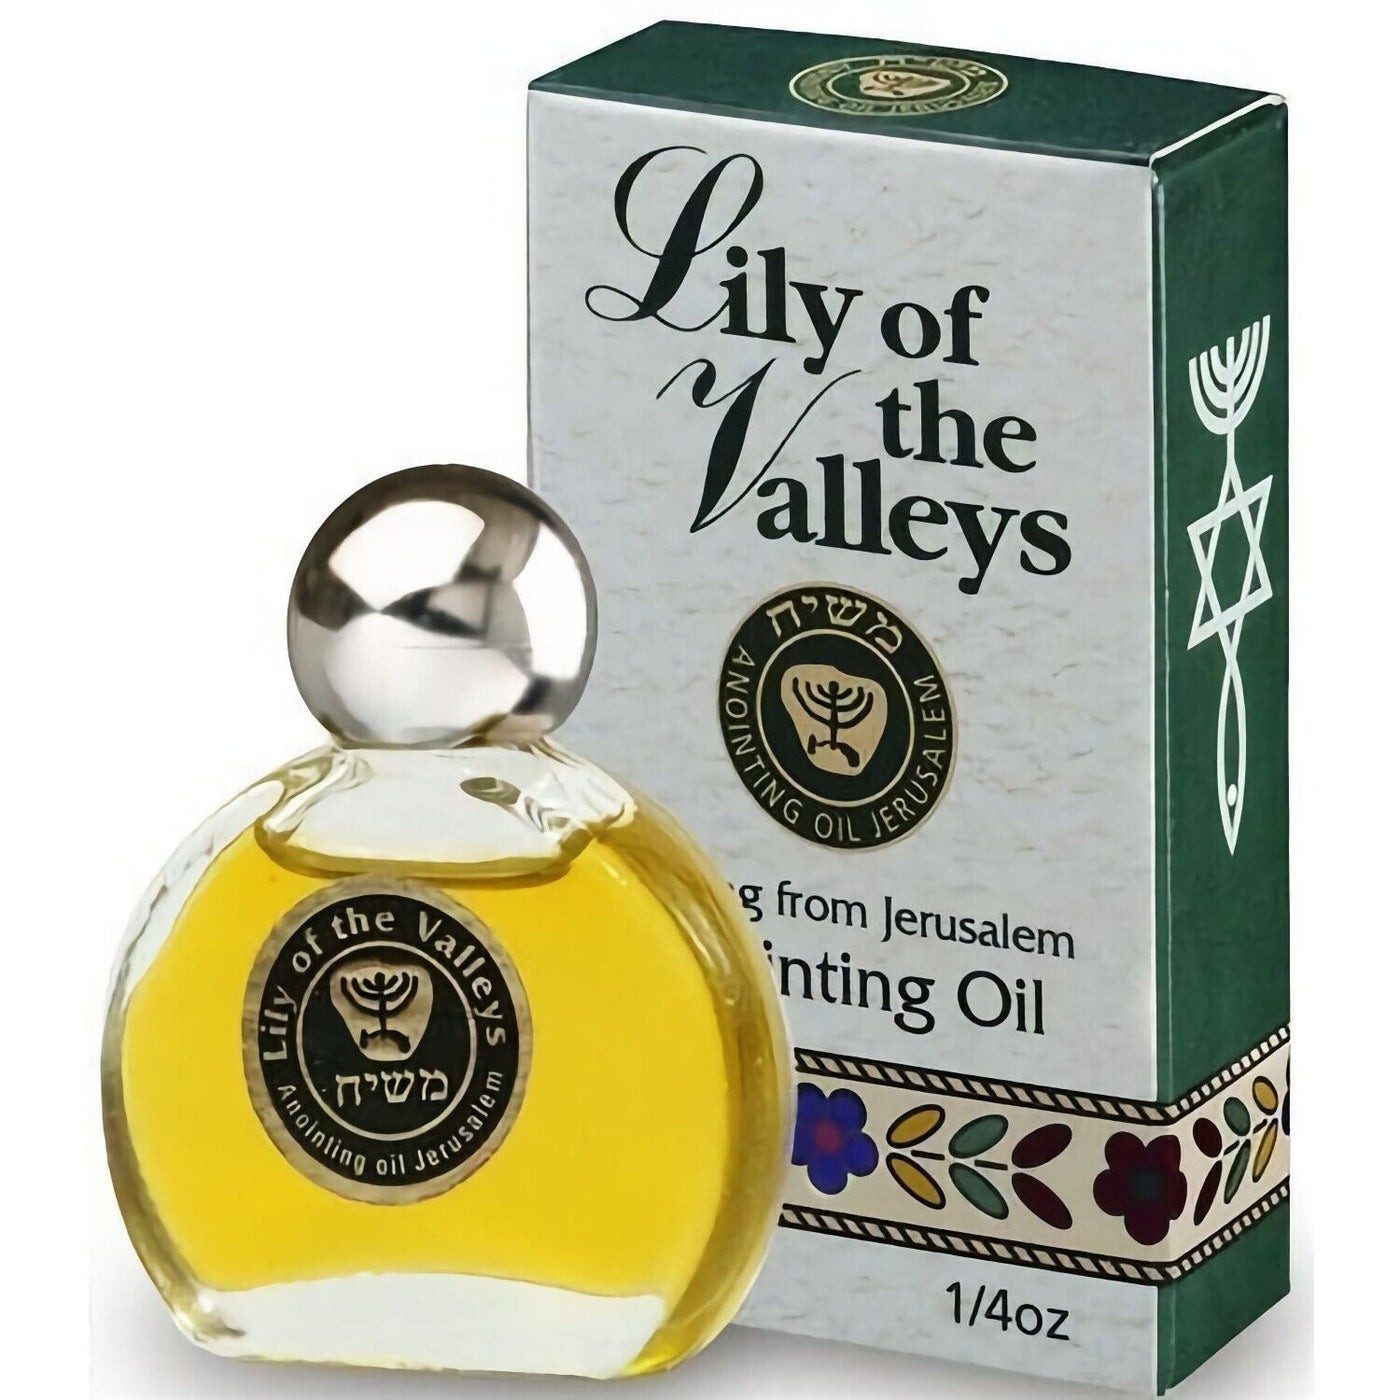 Lily Of the Valley Anointing Oil 7.5 ml. - 0.25 oz. From The Holy land